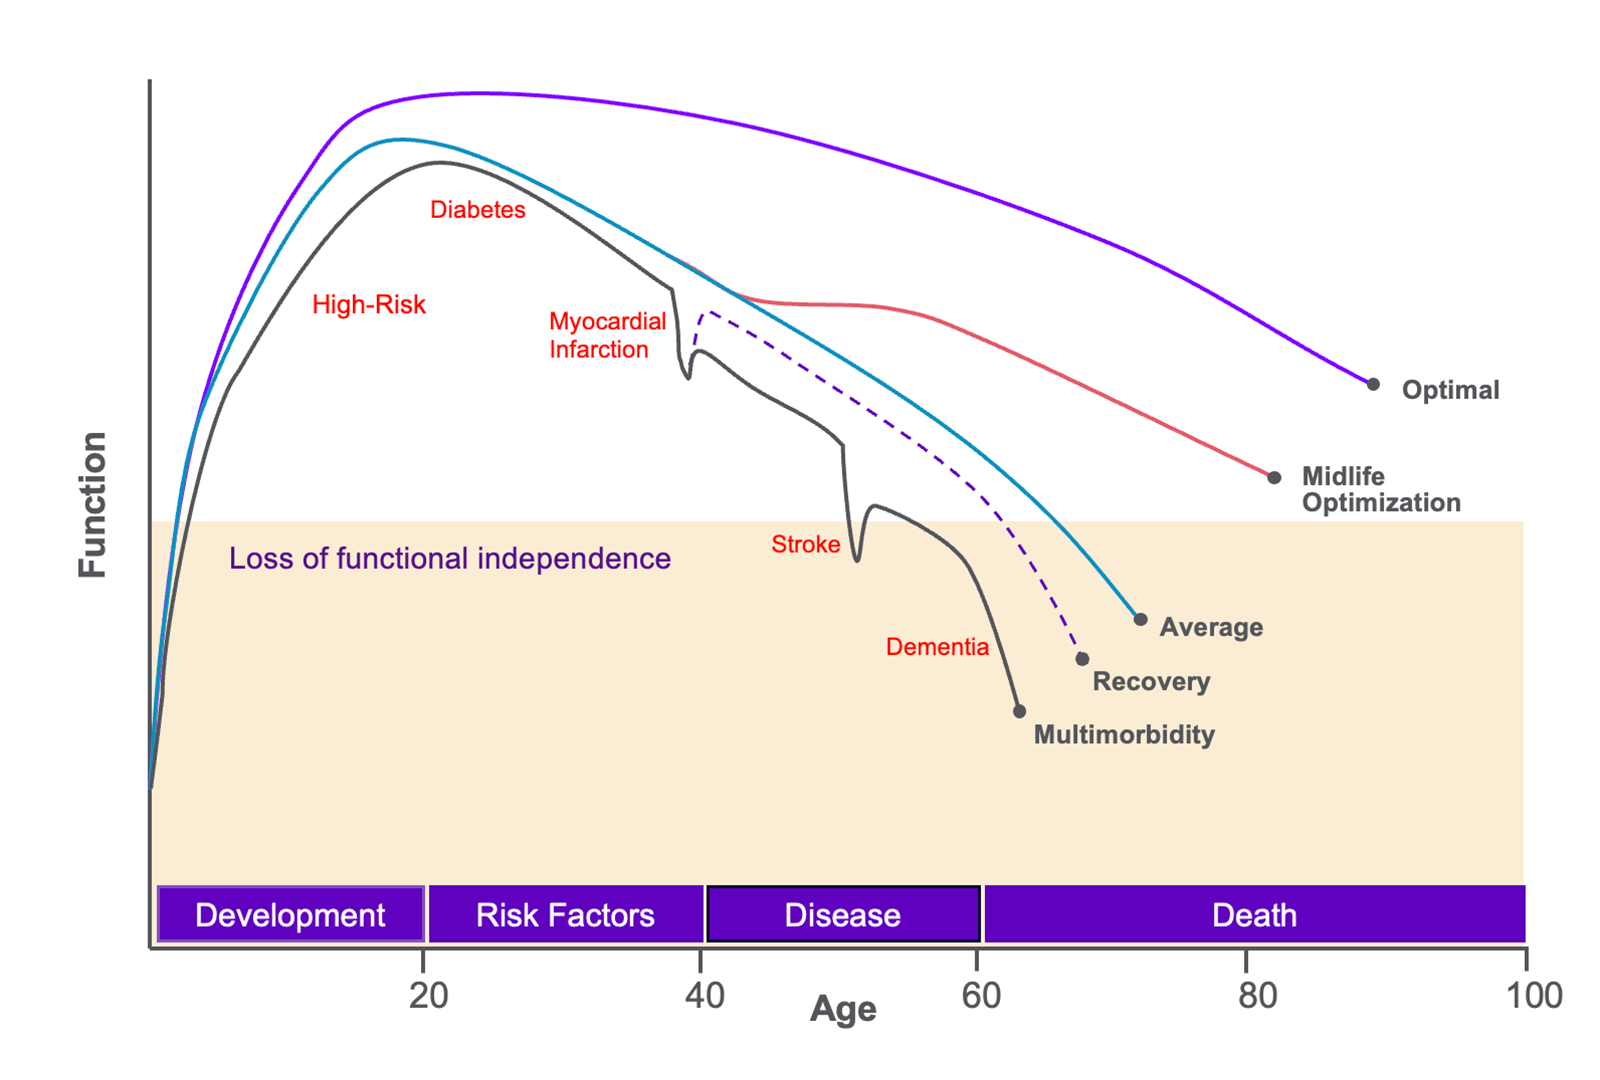 Line chart depicting changes in function across different ages depending on risk factors, disease, and other lifestyle factors.